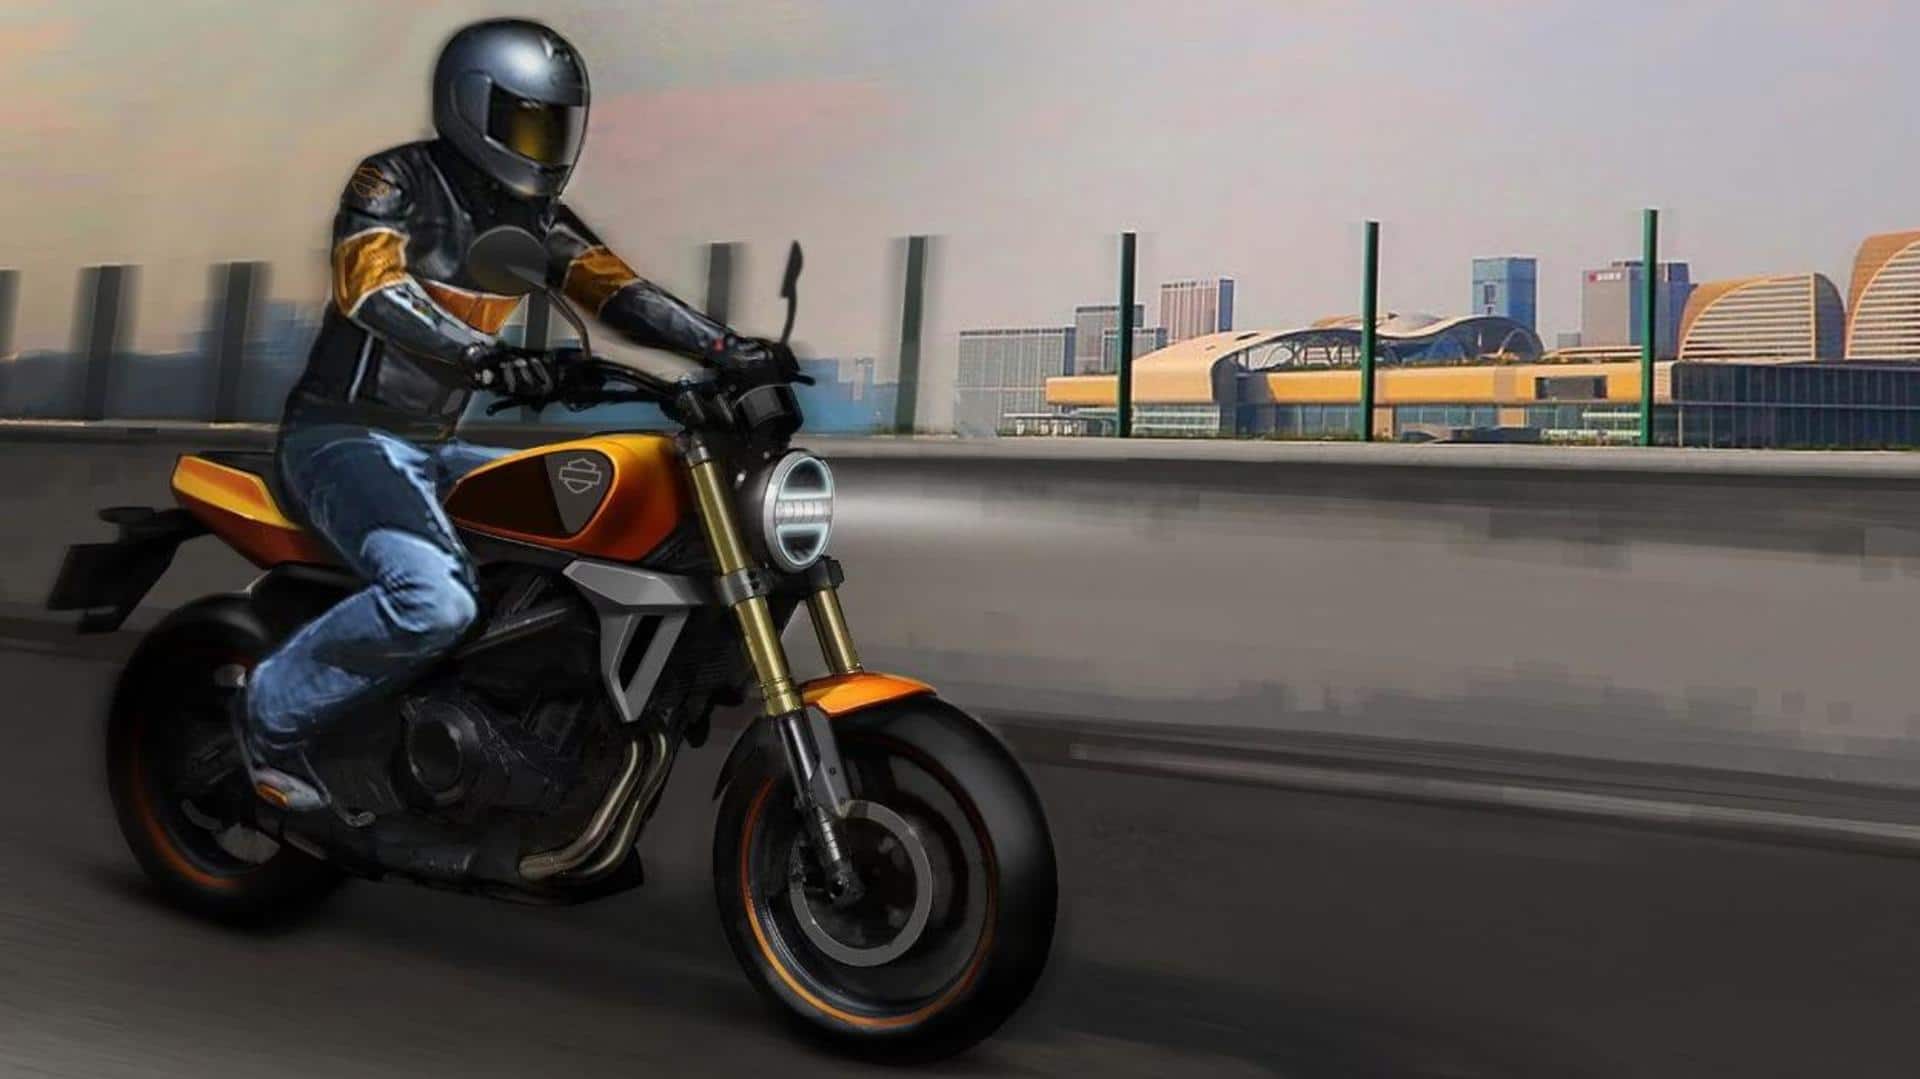 All-new Harley-Davidson X350 to arrive soon: What to expect